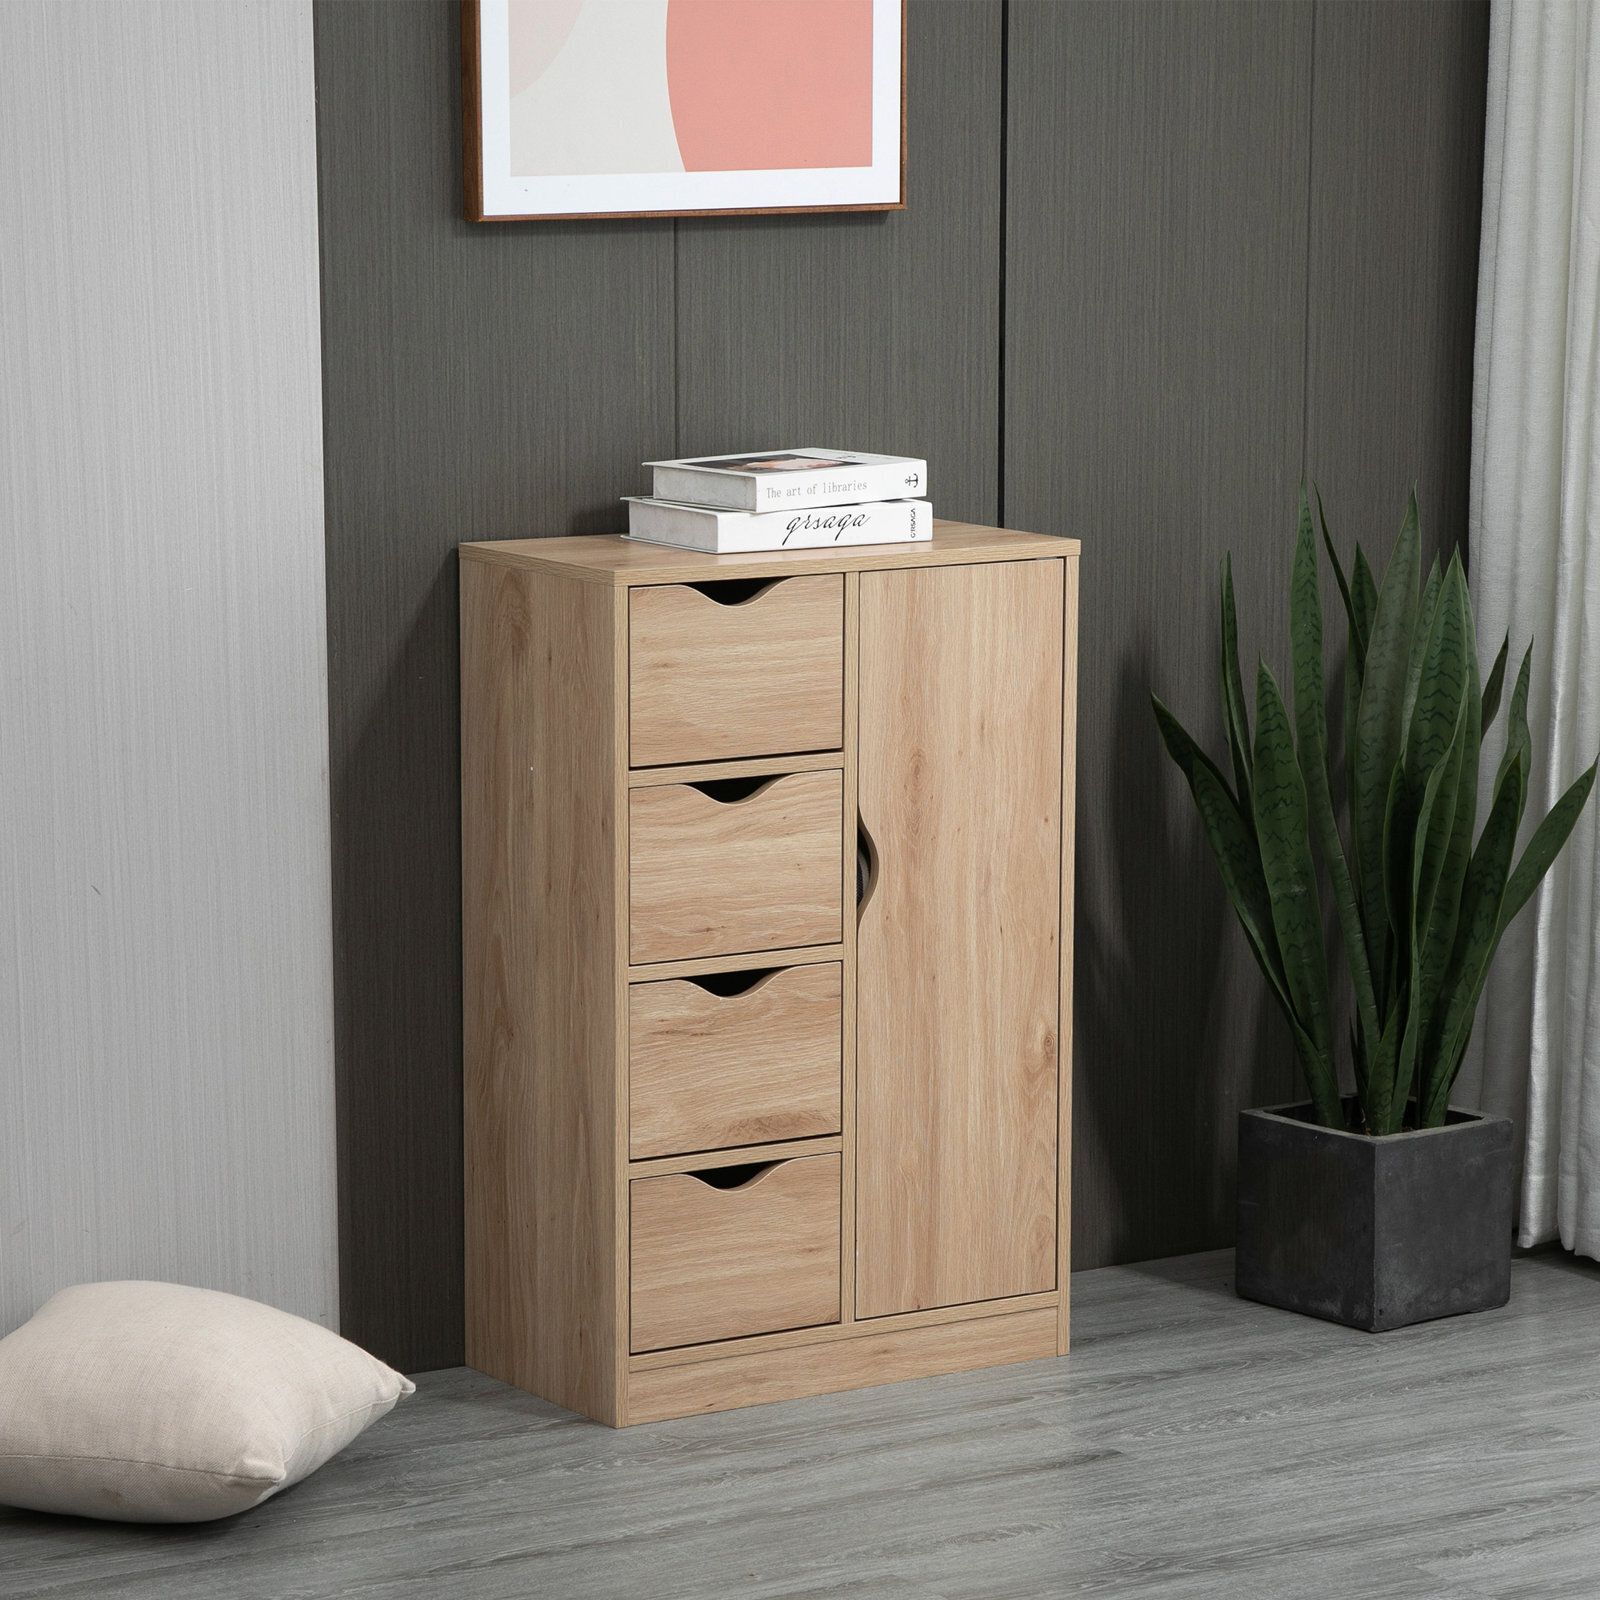 Small Wooden Cabinet With Drawers – Foter In Wood Cabinet With Drawers (Photo 7 of 15)